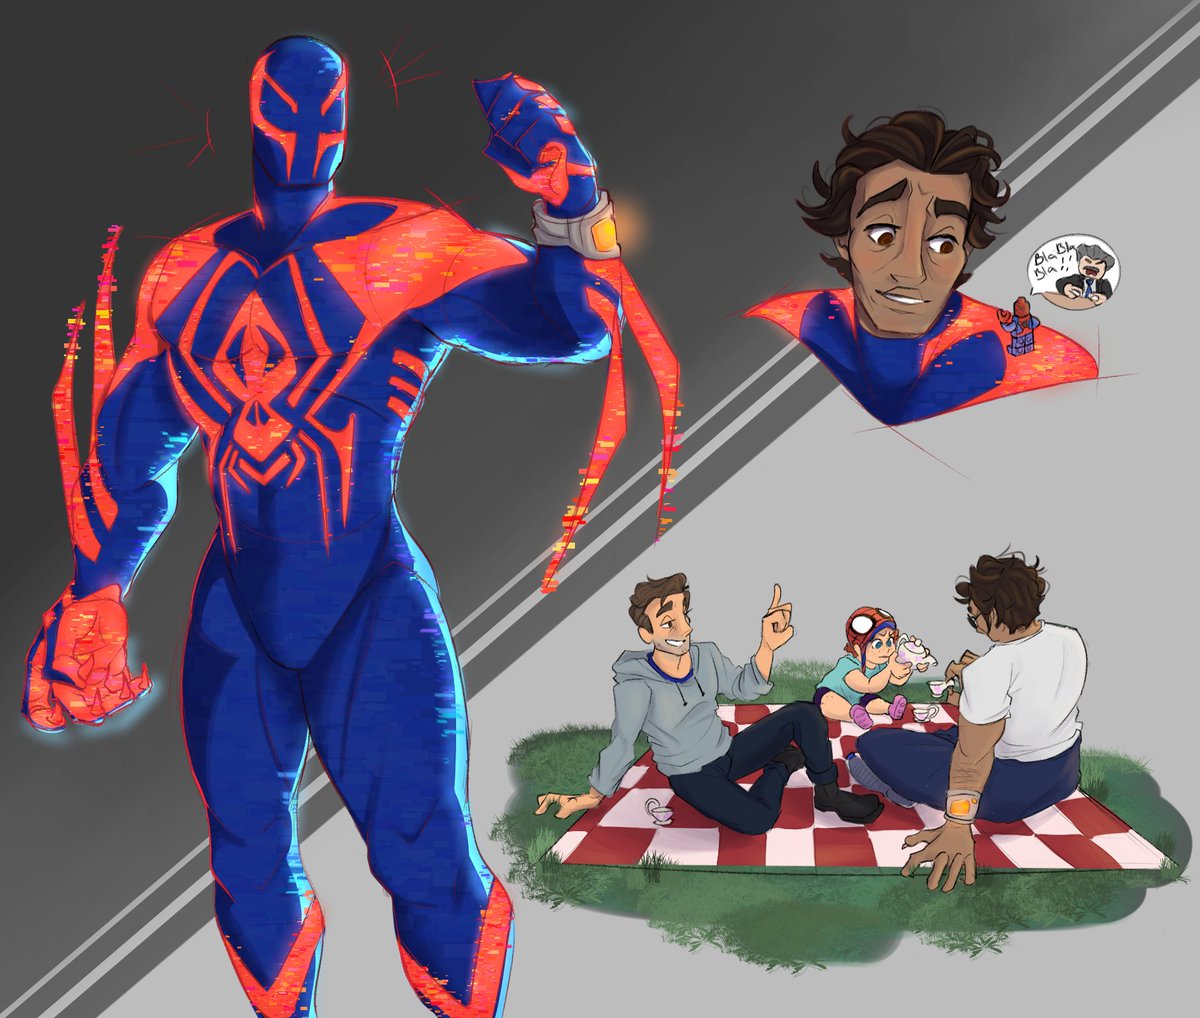 I've only got to see the movie once,  but I'm already obsessed 😩 

#MIGUELOHARA #SpiderMan2099 #AcrossTheSpiderVerse #SpiderVerse #PeterBParker #MaydayParker